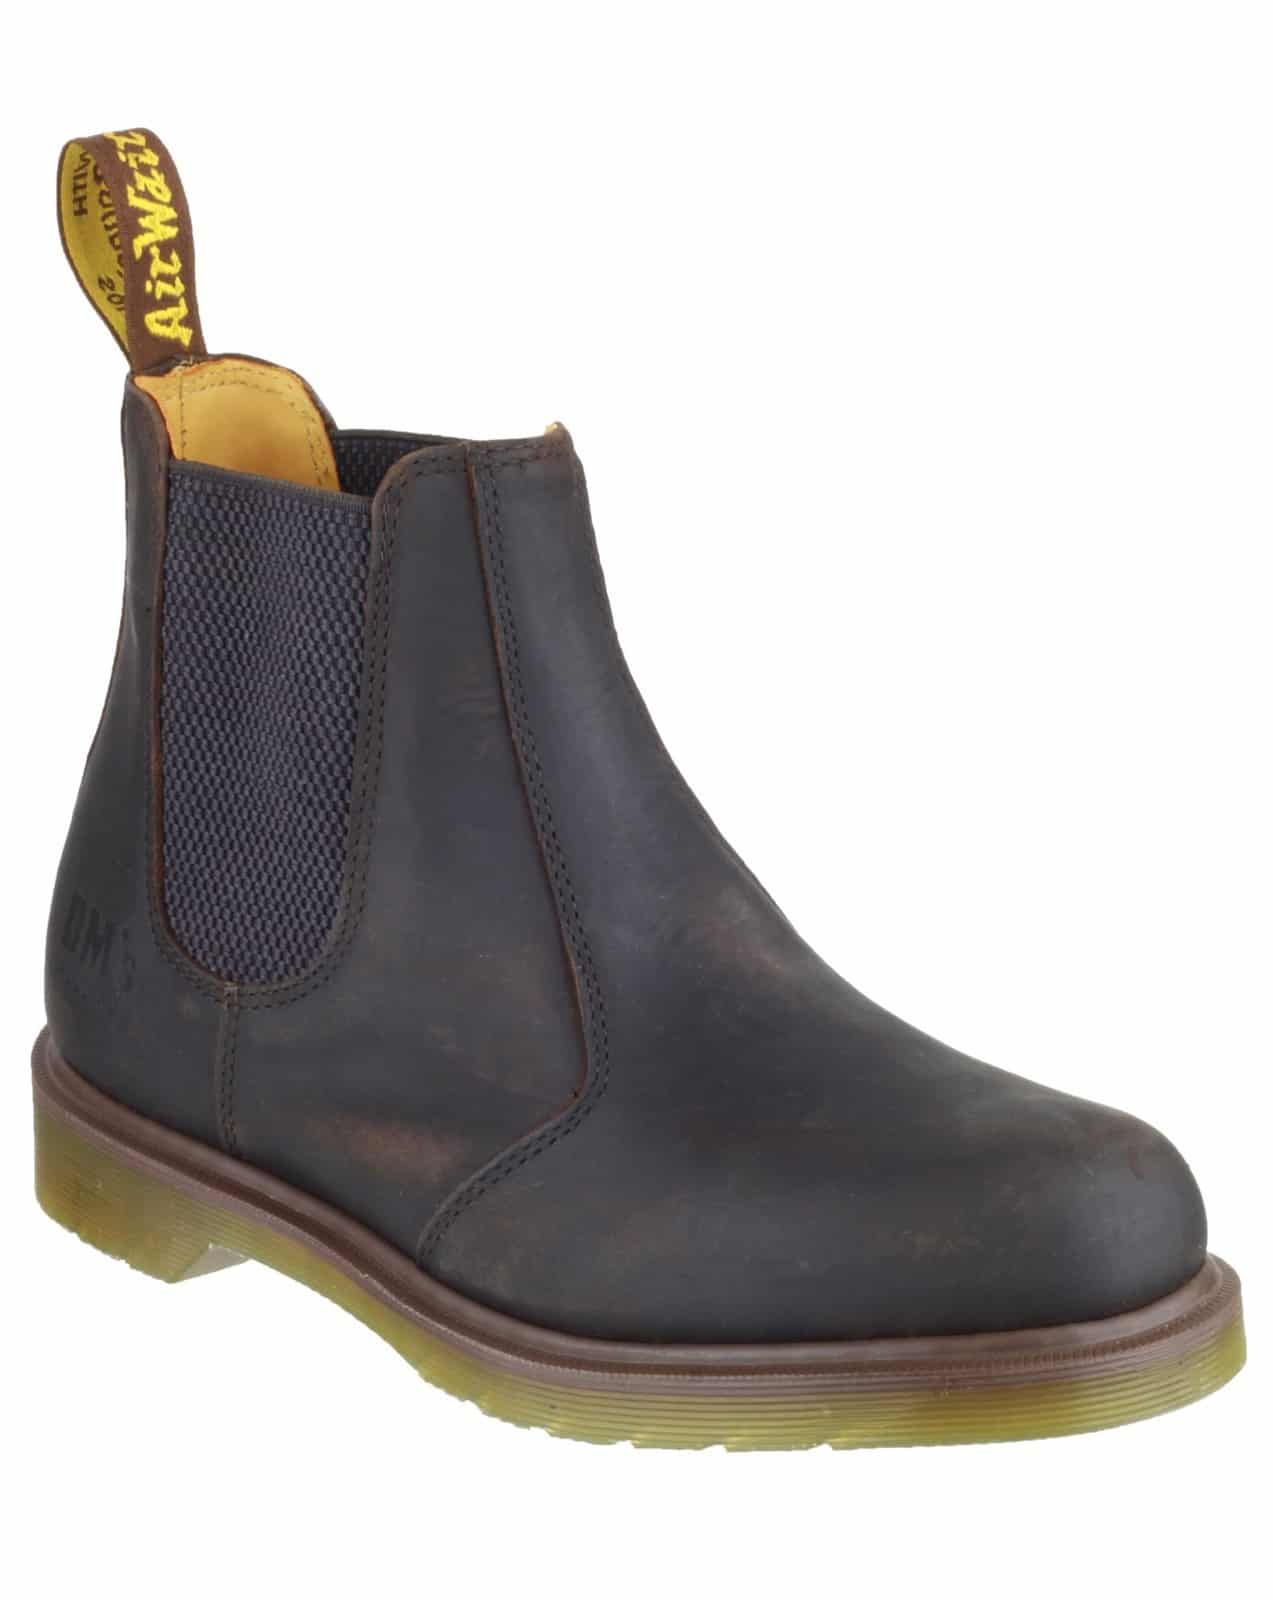 Occupational 8250 Chelsea Boot - Industrial Workwear